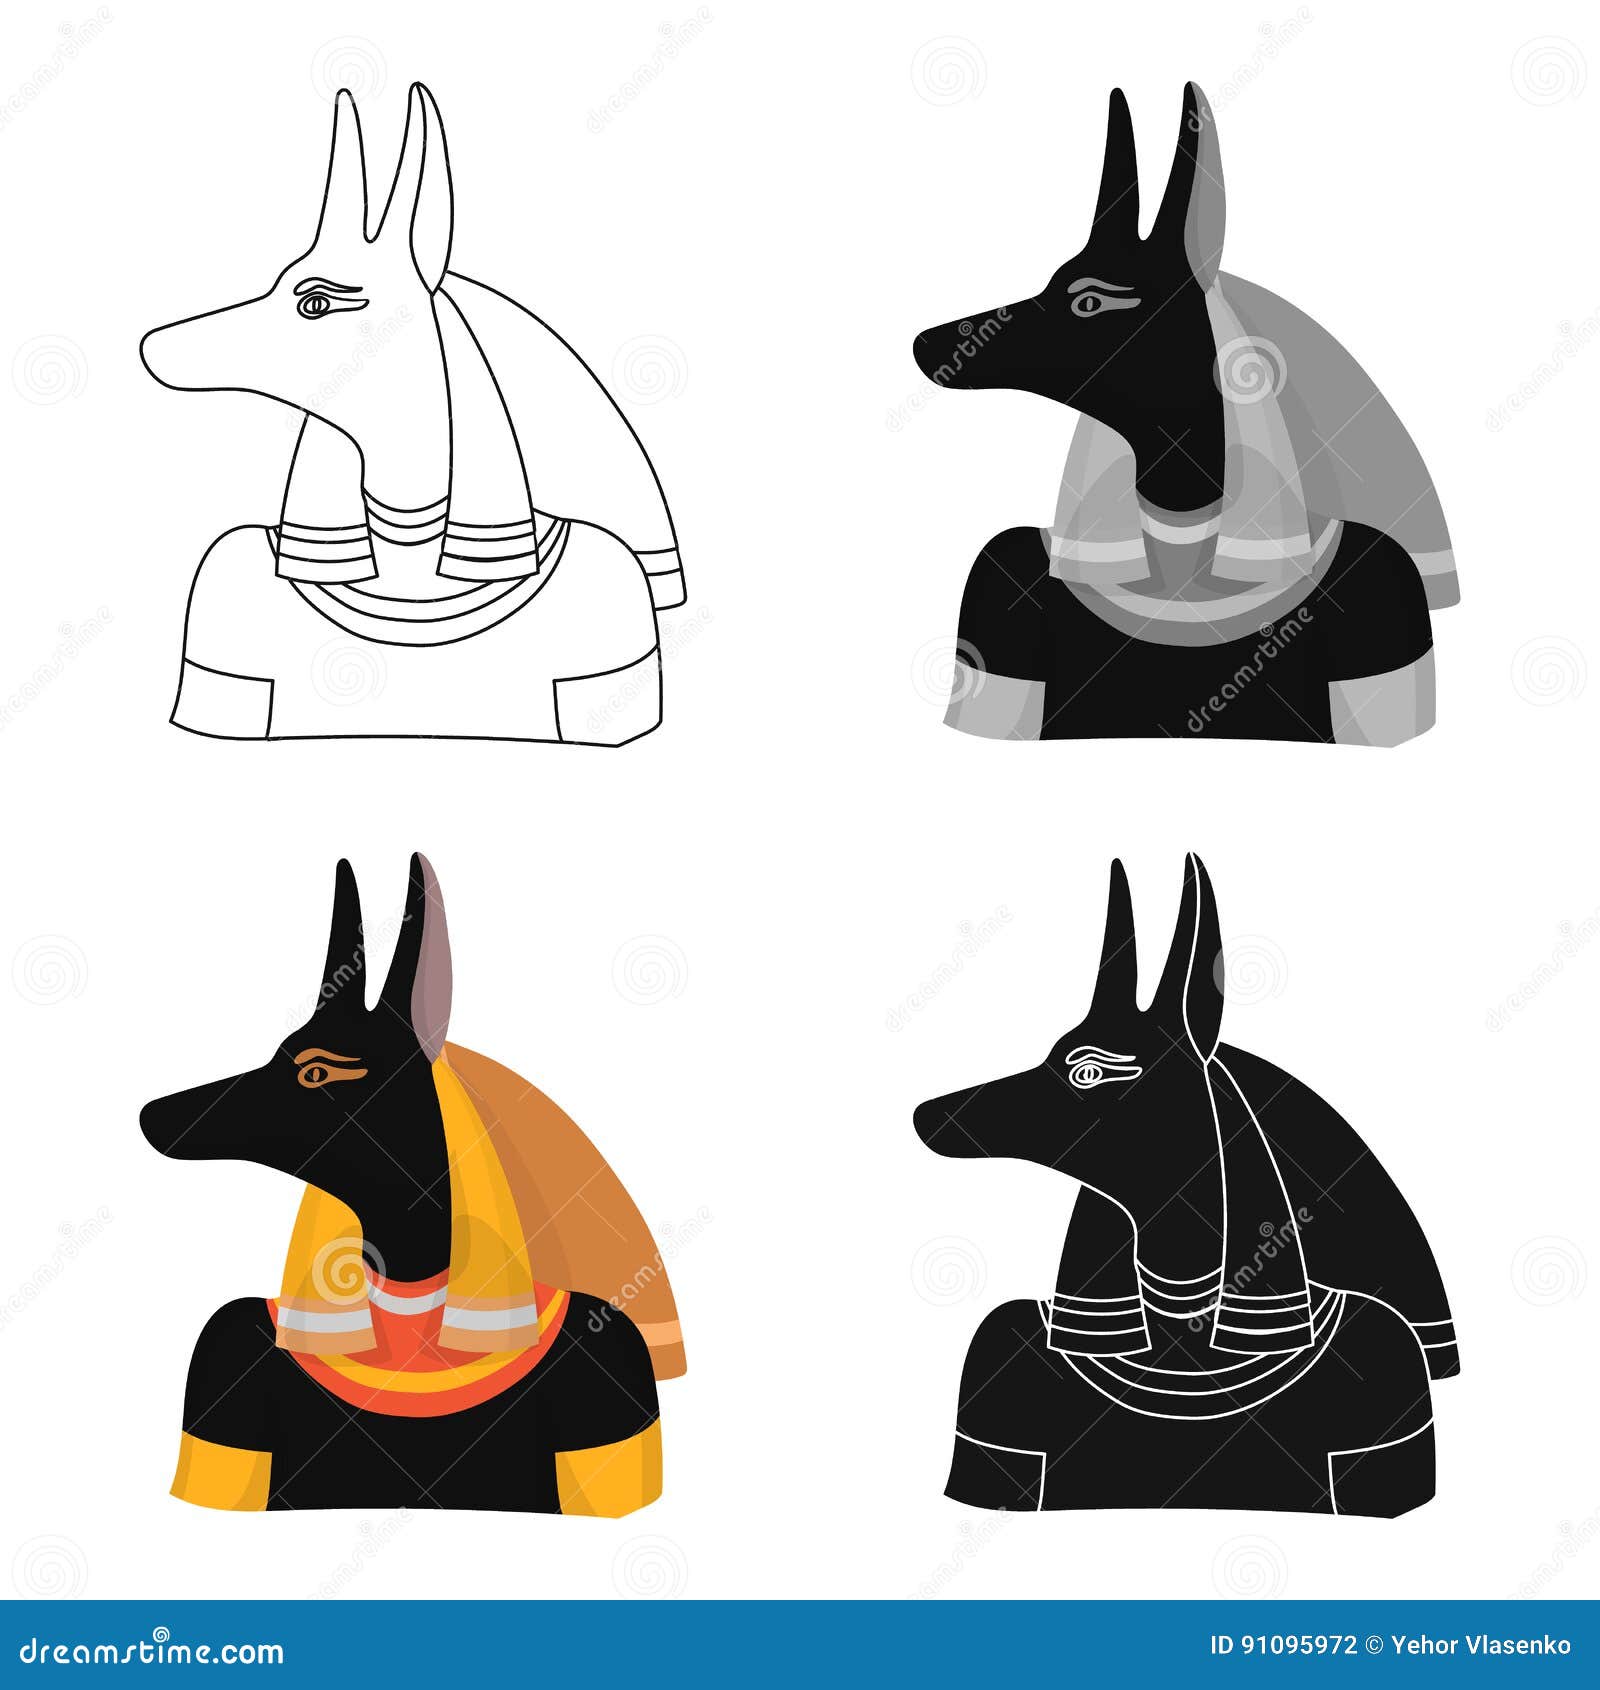 Anubis Icon In Cartoon Style Isolated On White Background